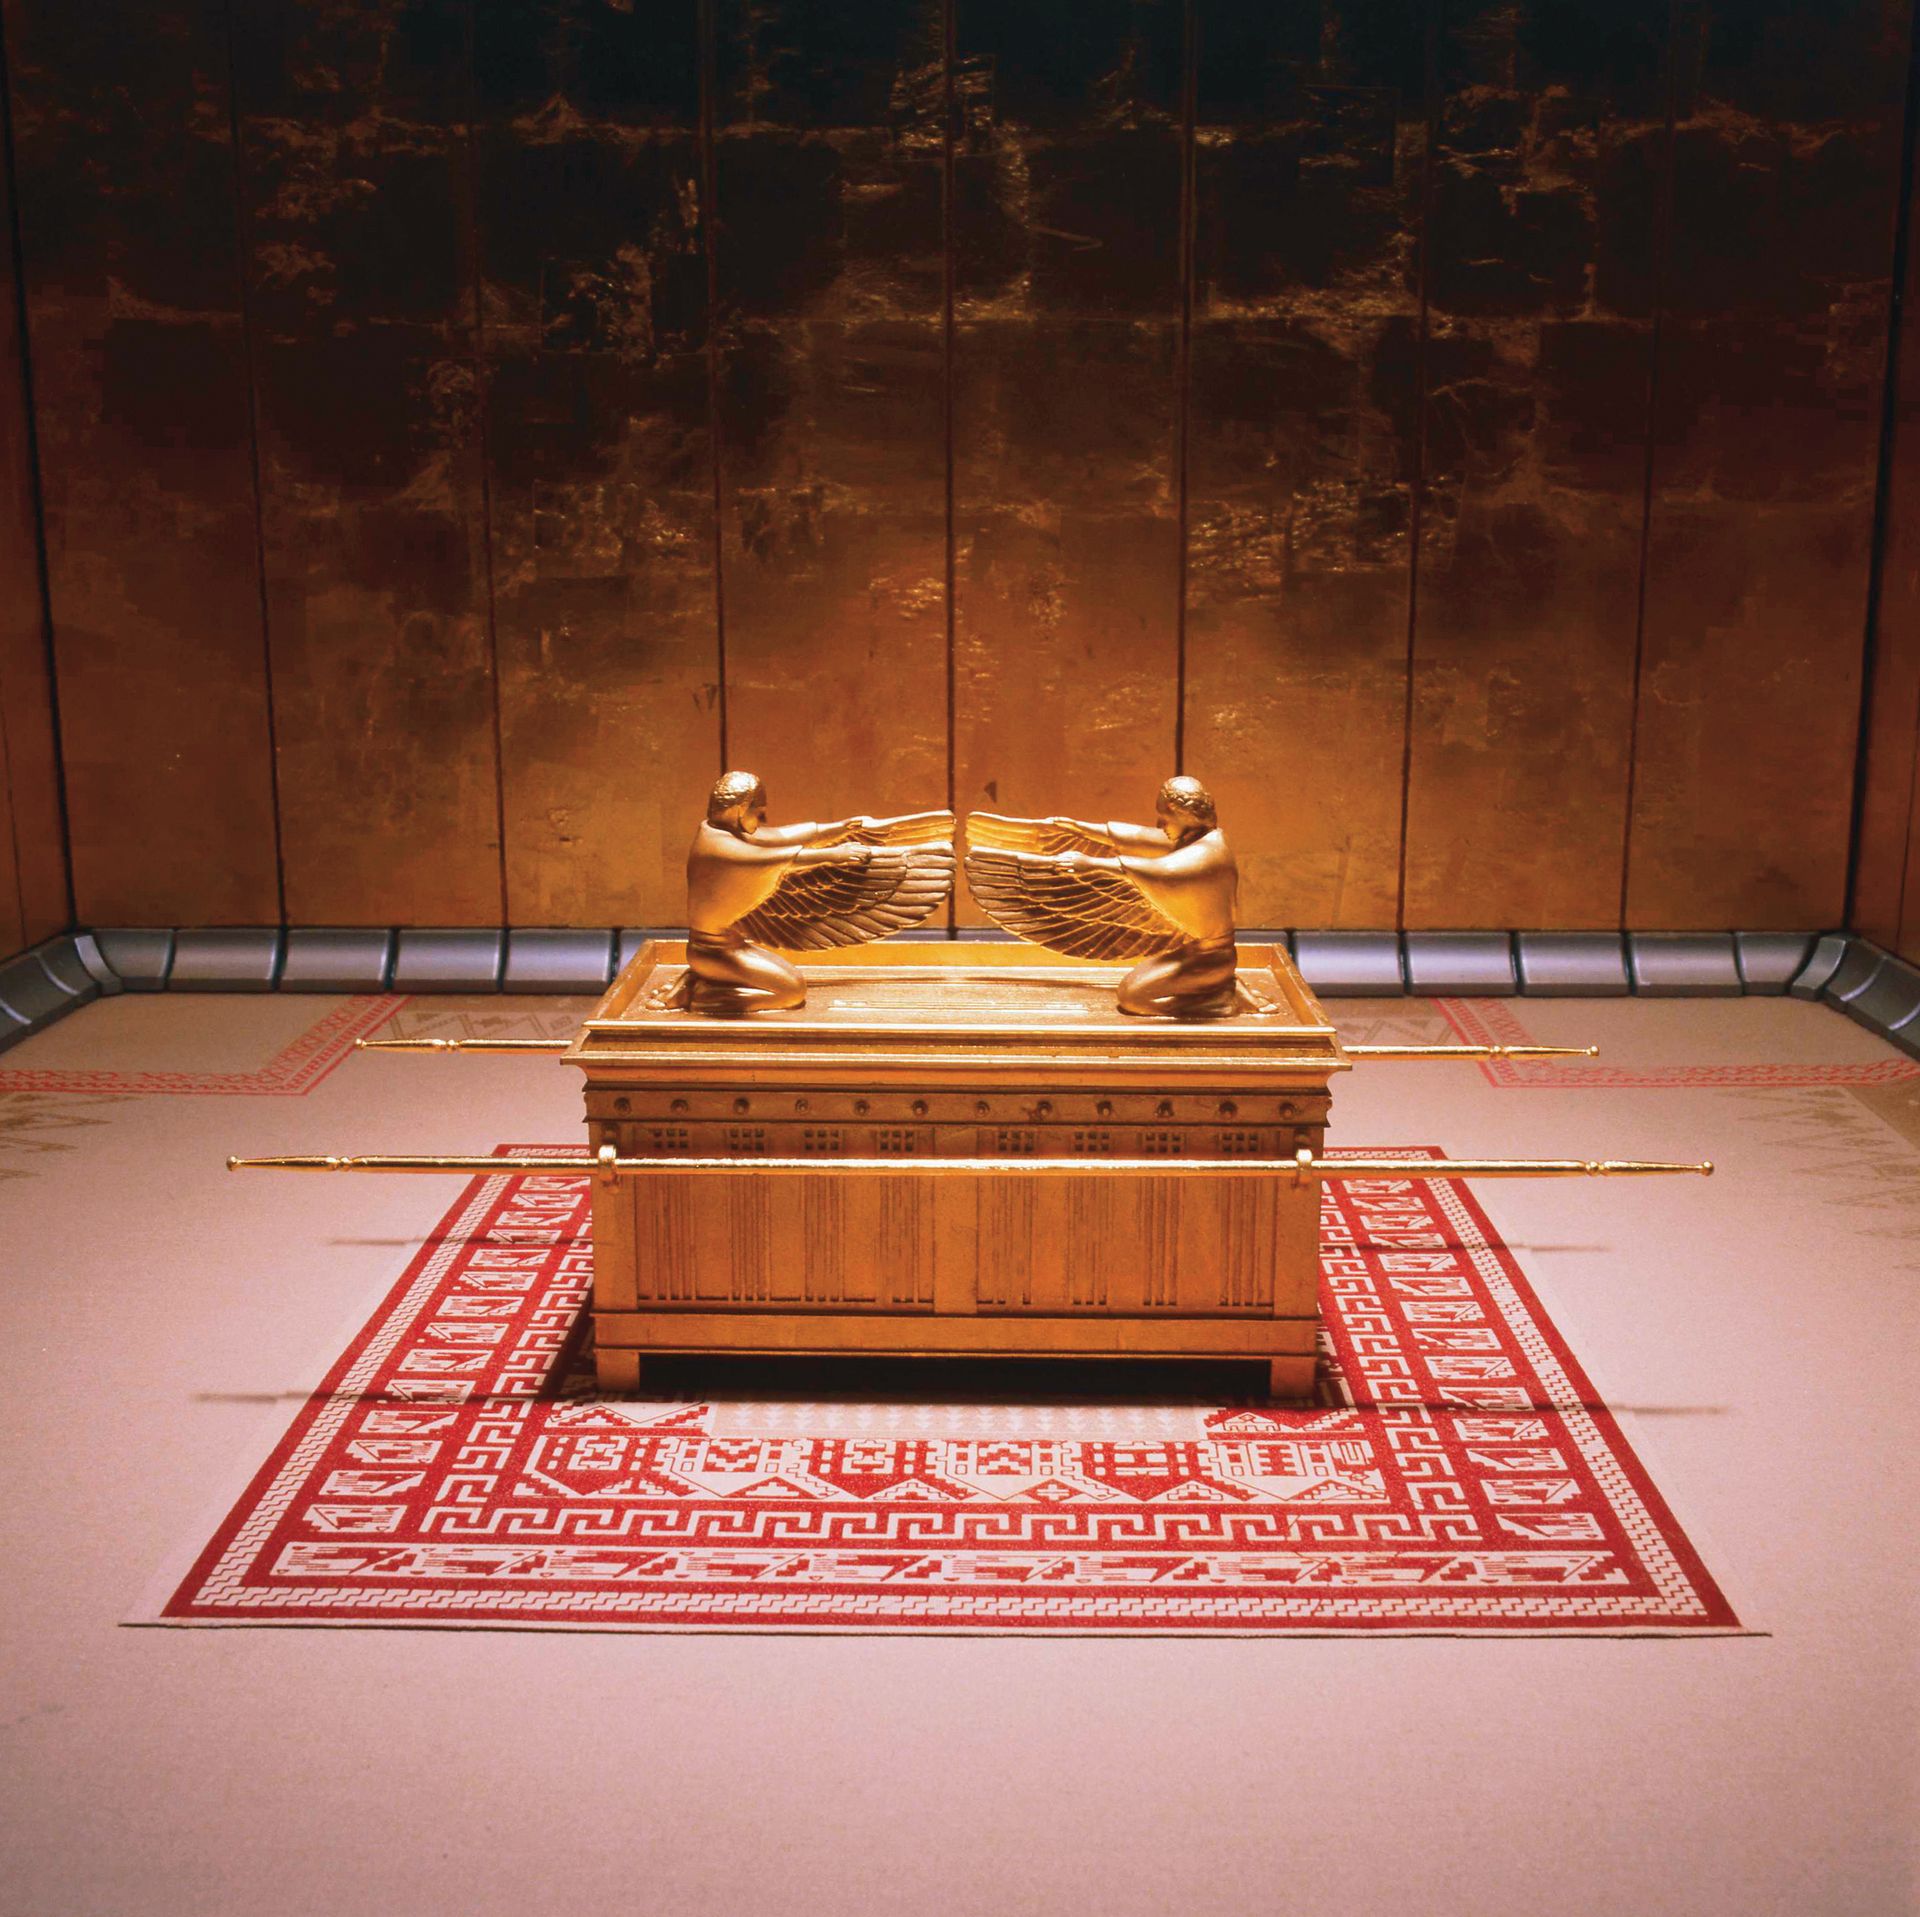 A replica of the ark of the covenant.